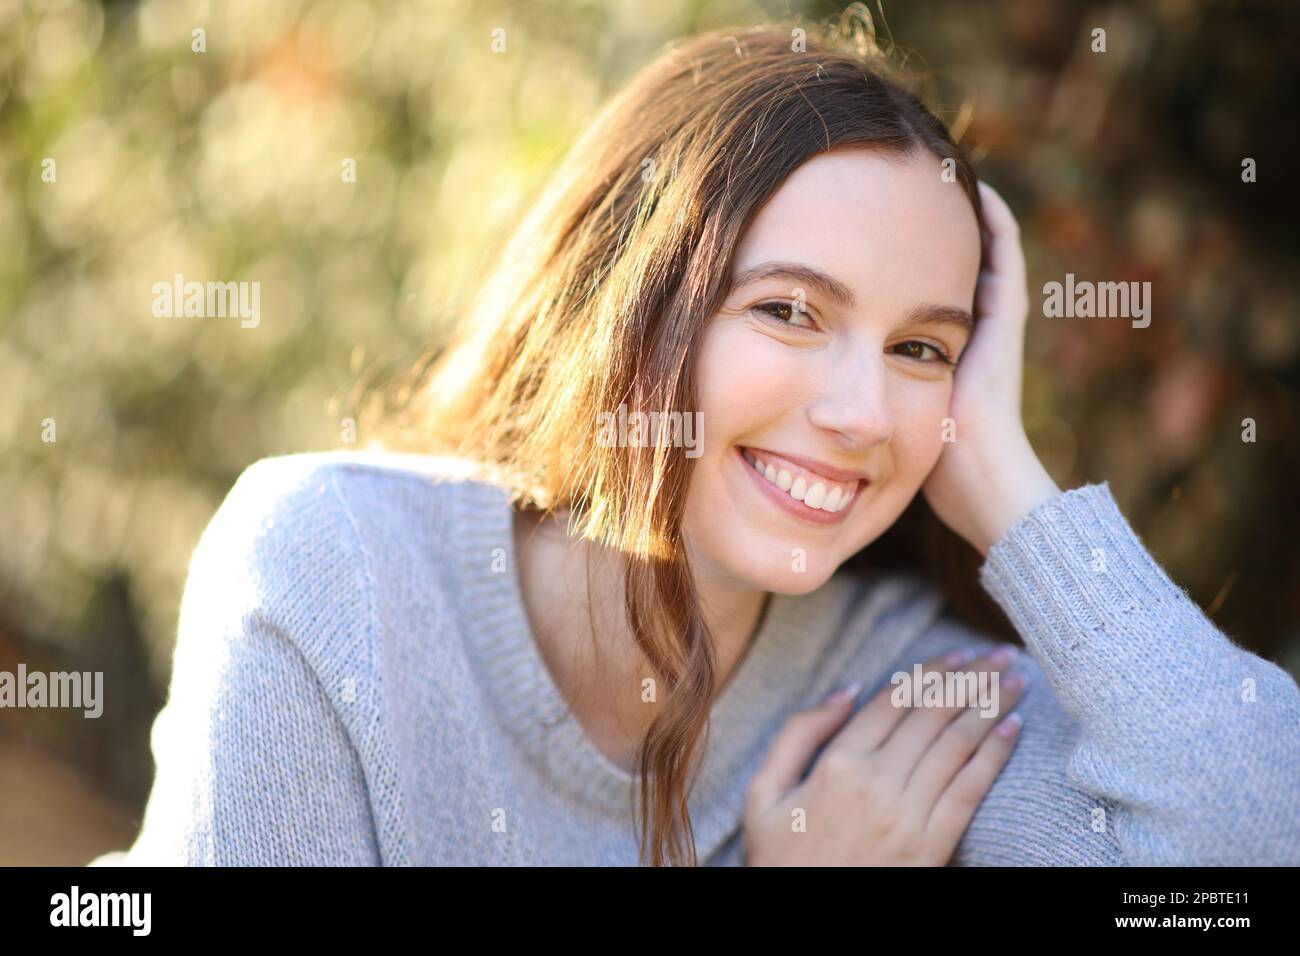 Portrait of a happy woman looking at camera sitting in a park Stock Photo